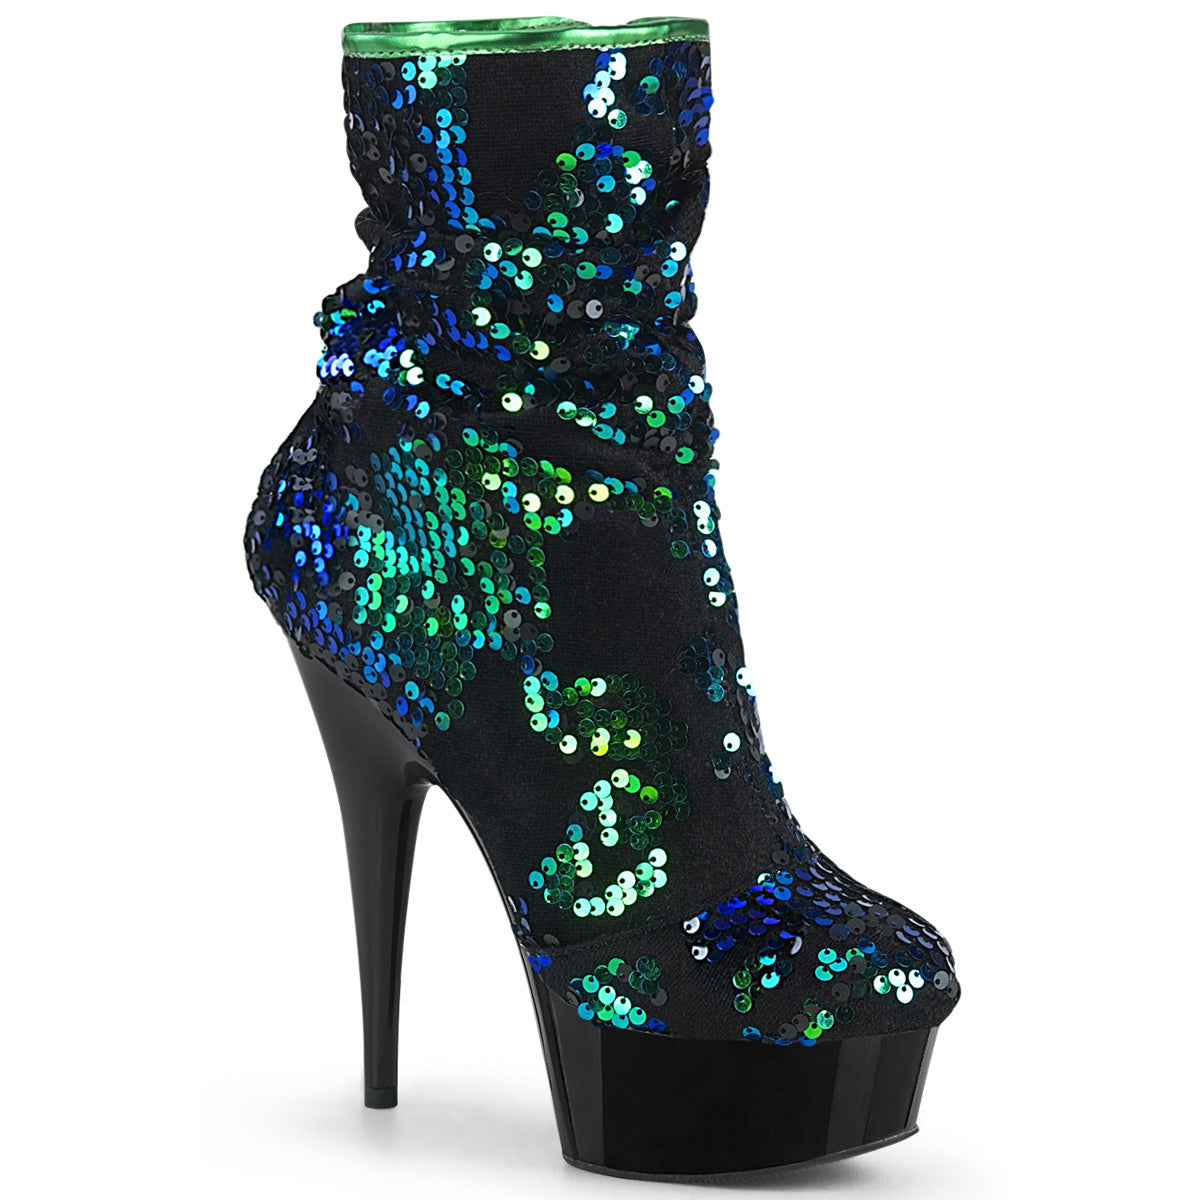 Pleaser Womens Ankle Boots DELIGHT-1004 Green Iridescent Sequins/Blk